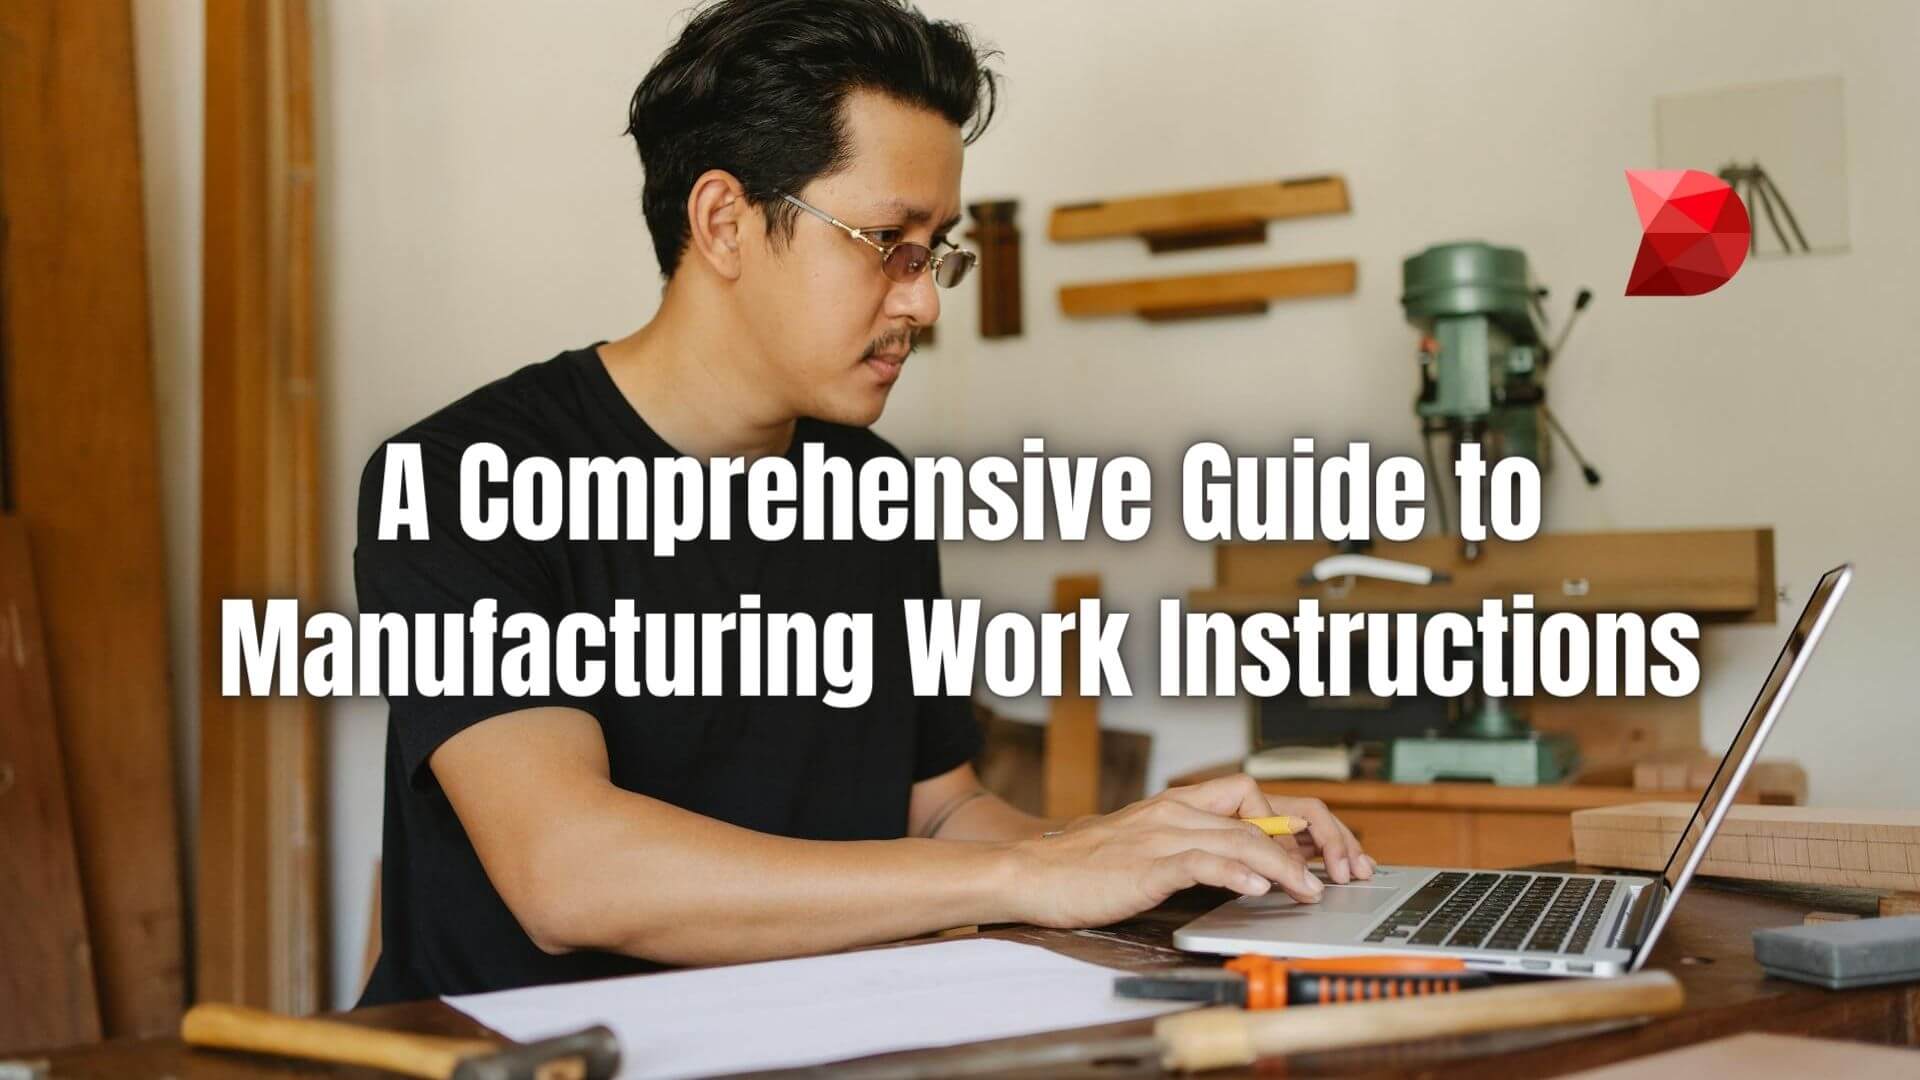 Master the art of Manufacturing Work Instructions. Here's a step-by-step guide to elevate your processes and achieve peak efficiency.